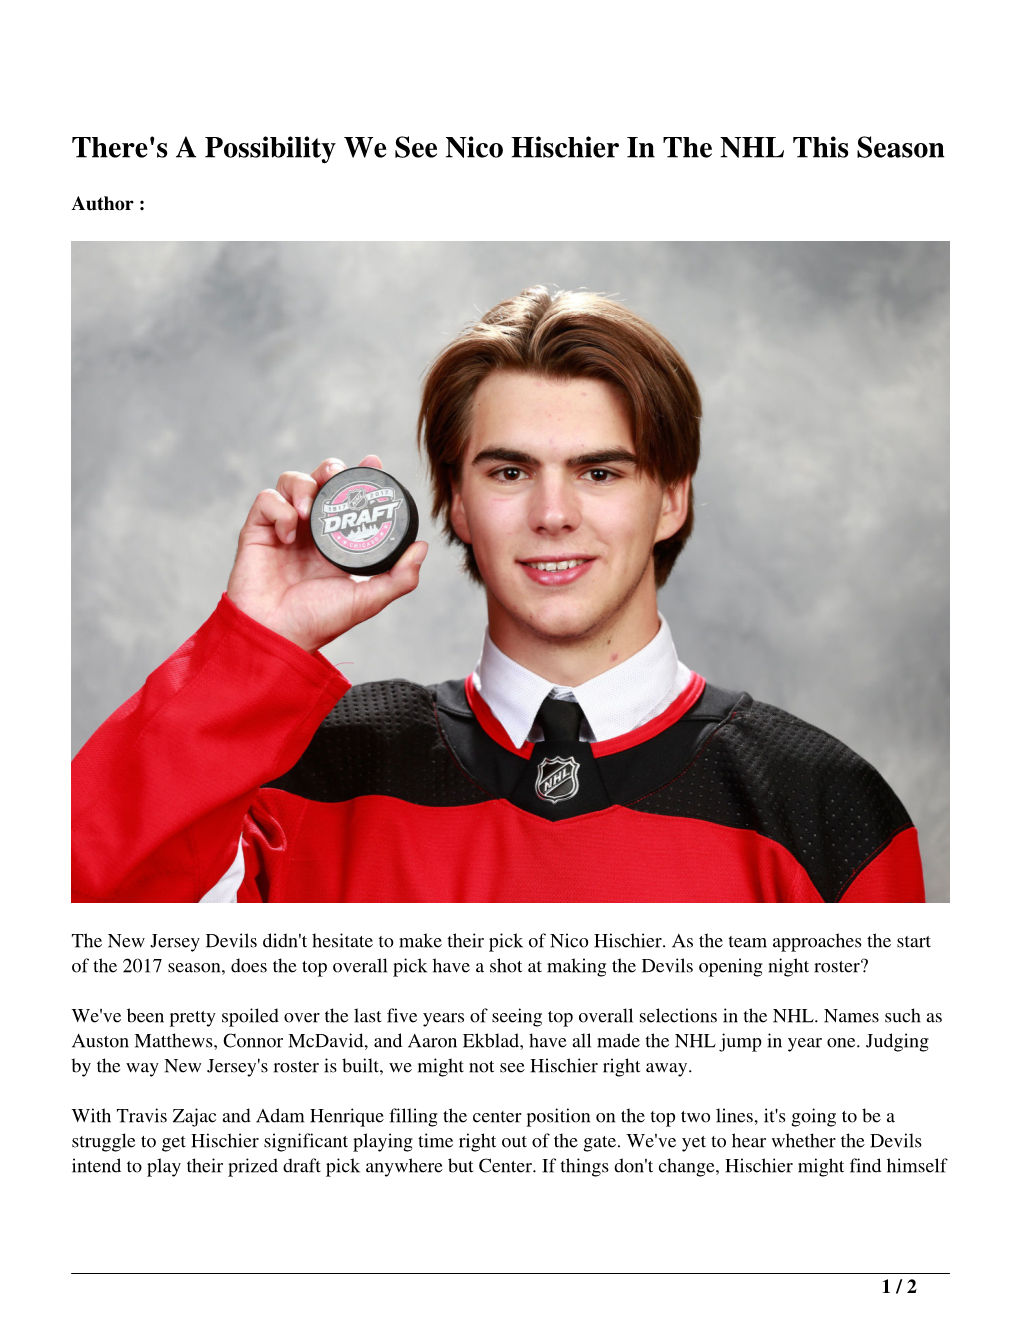 S a Possibility We See Nico Hischier in the NHL This Season